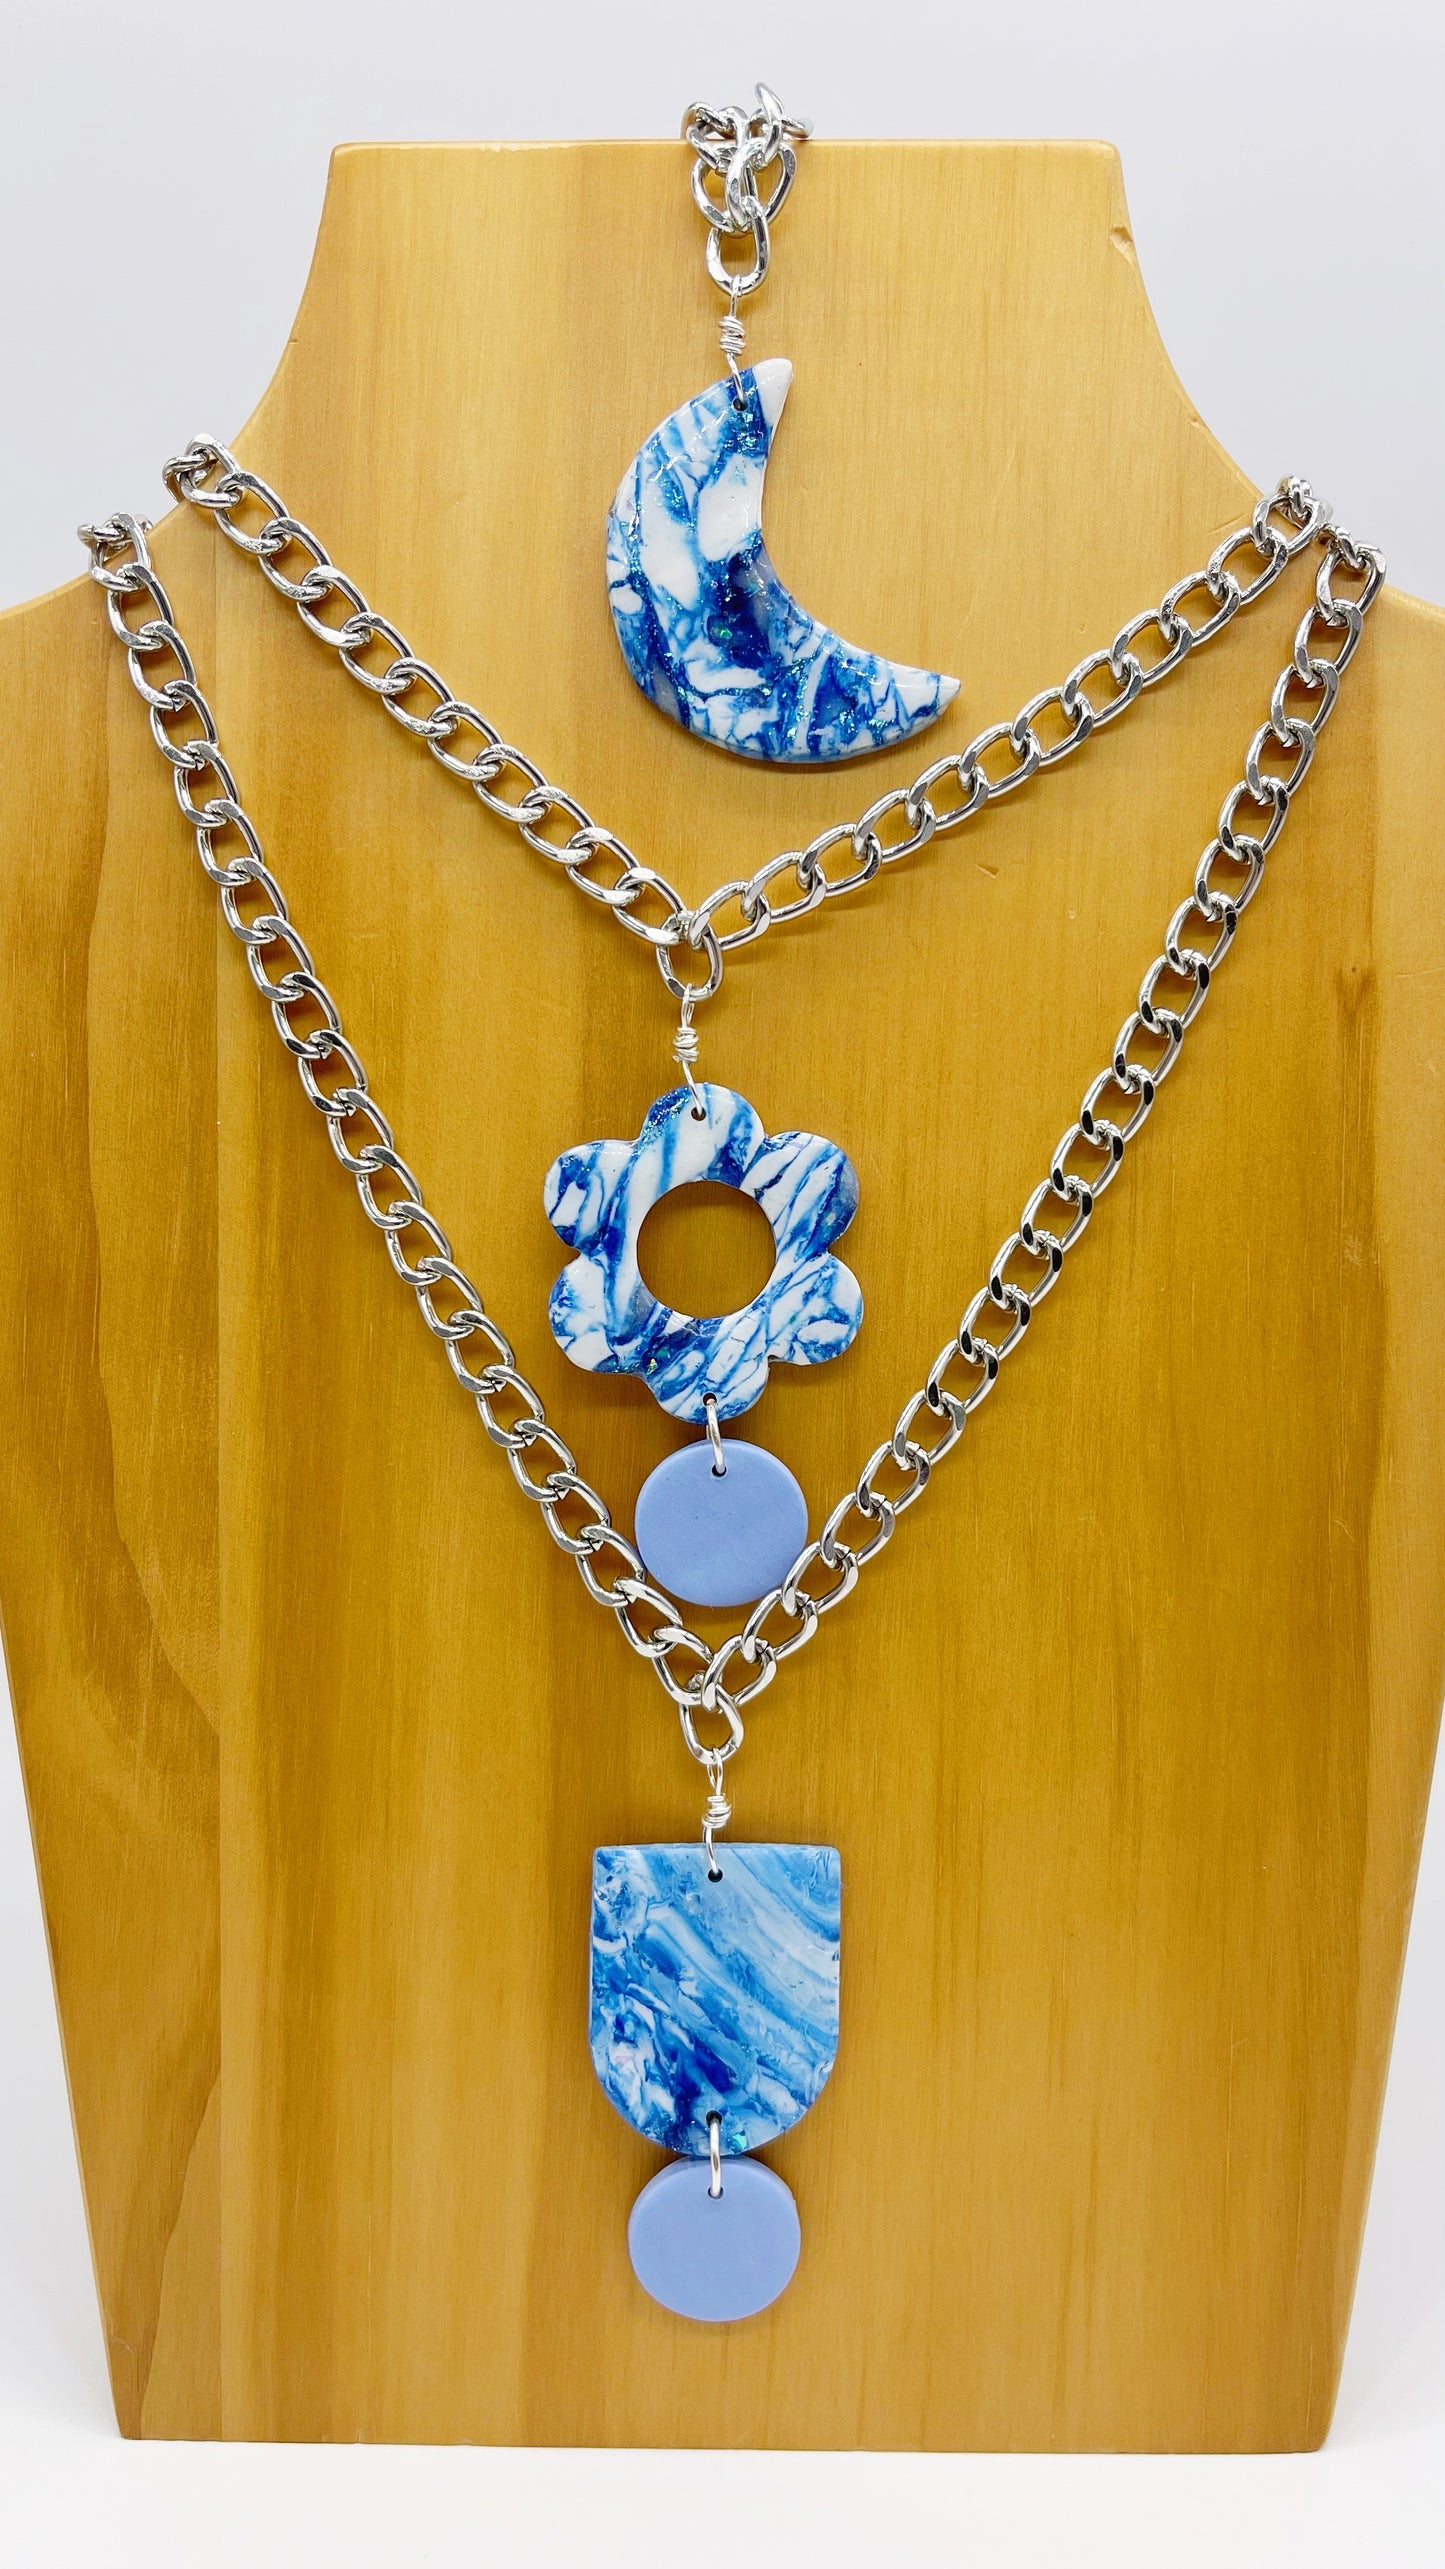 Blue Marble Necklace $29